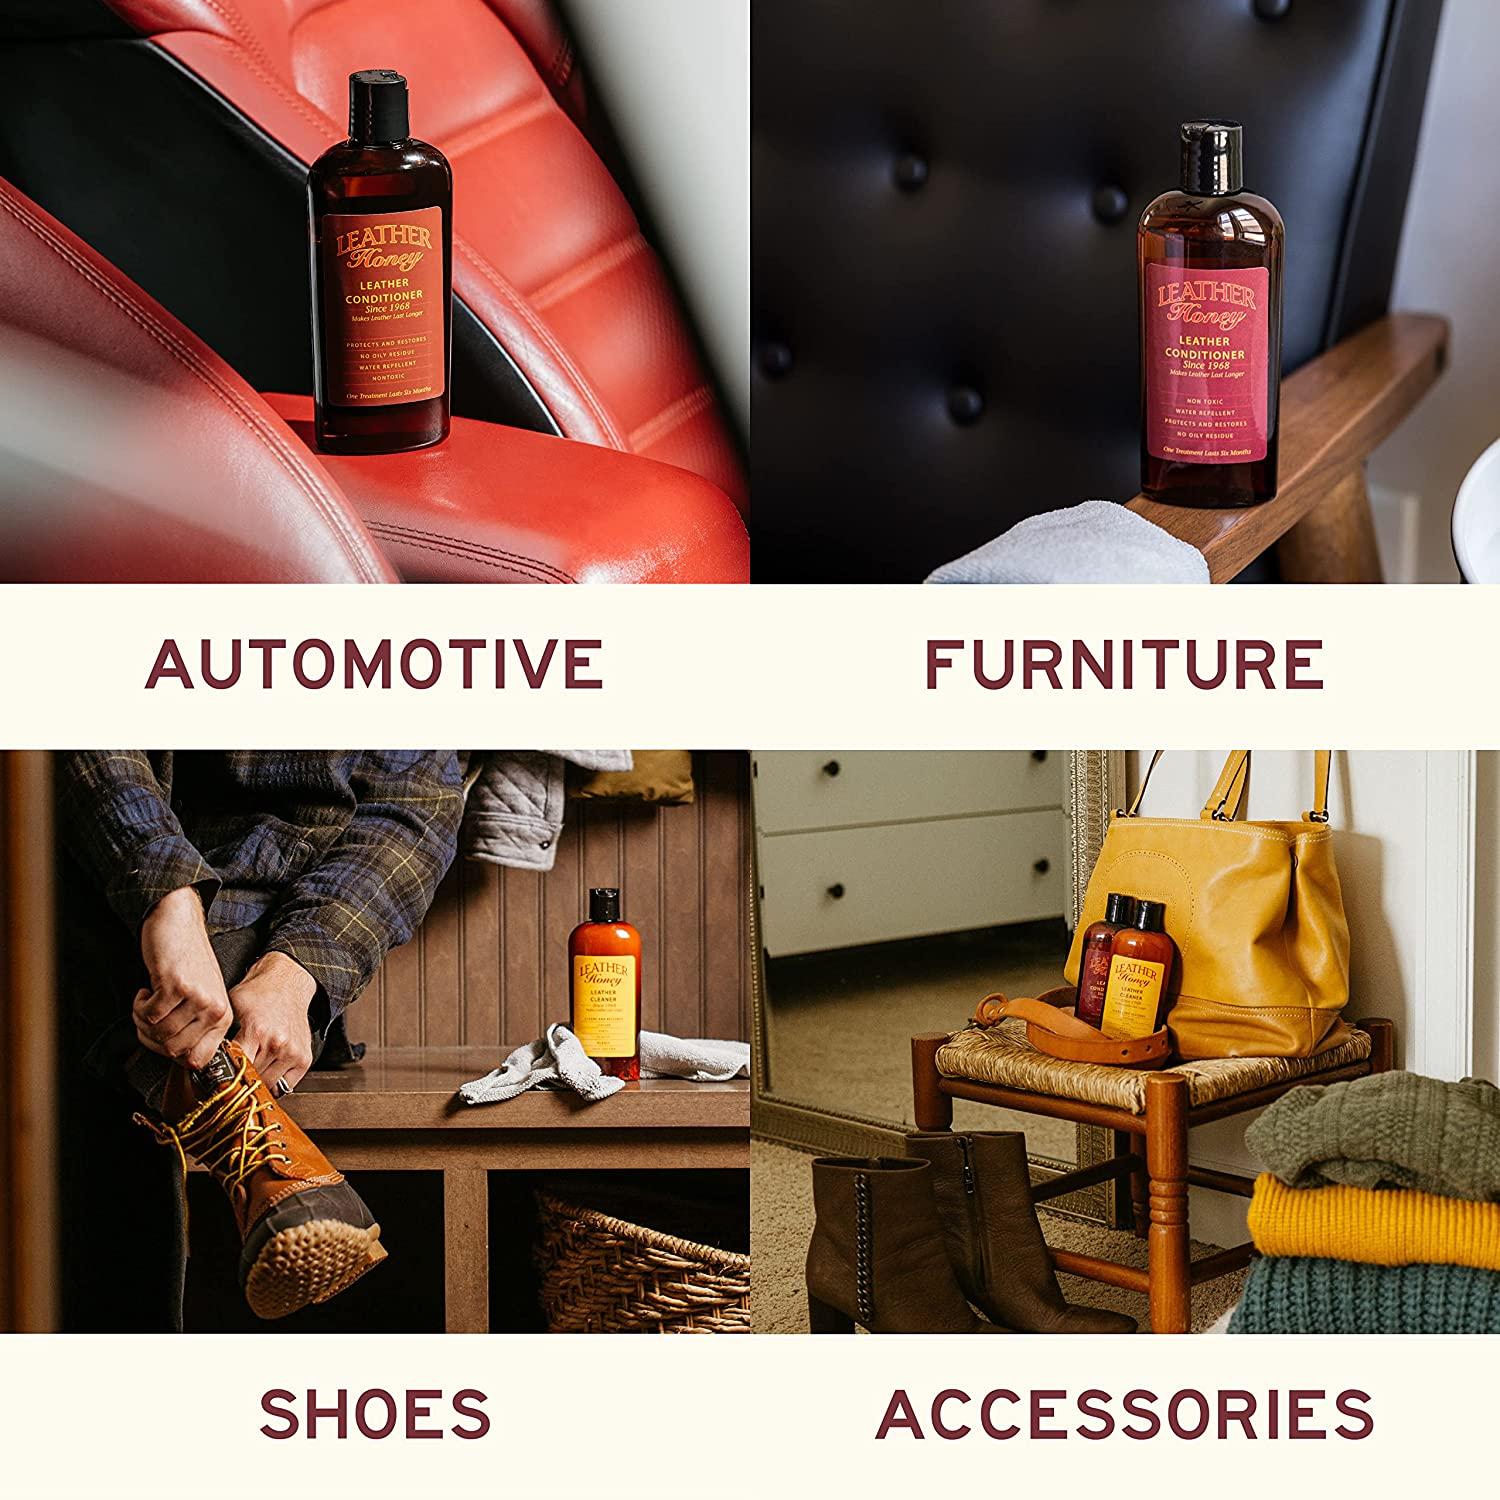 Leather Honey Leather Cleaner The Best Leather Cleaner for Vinyl and  Leather Apparel, Furniture, Auto Interior, Shoes and Accessories.  Concentrated